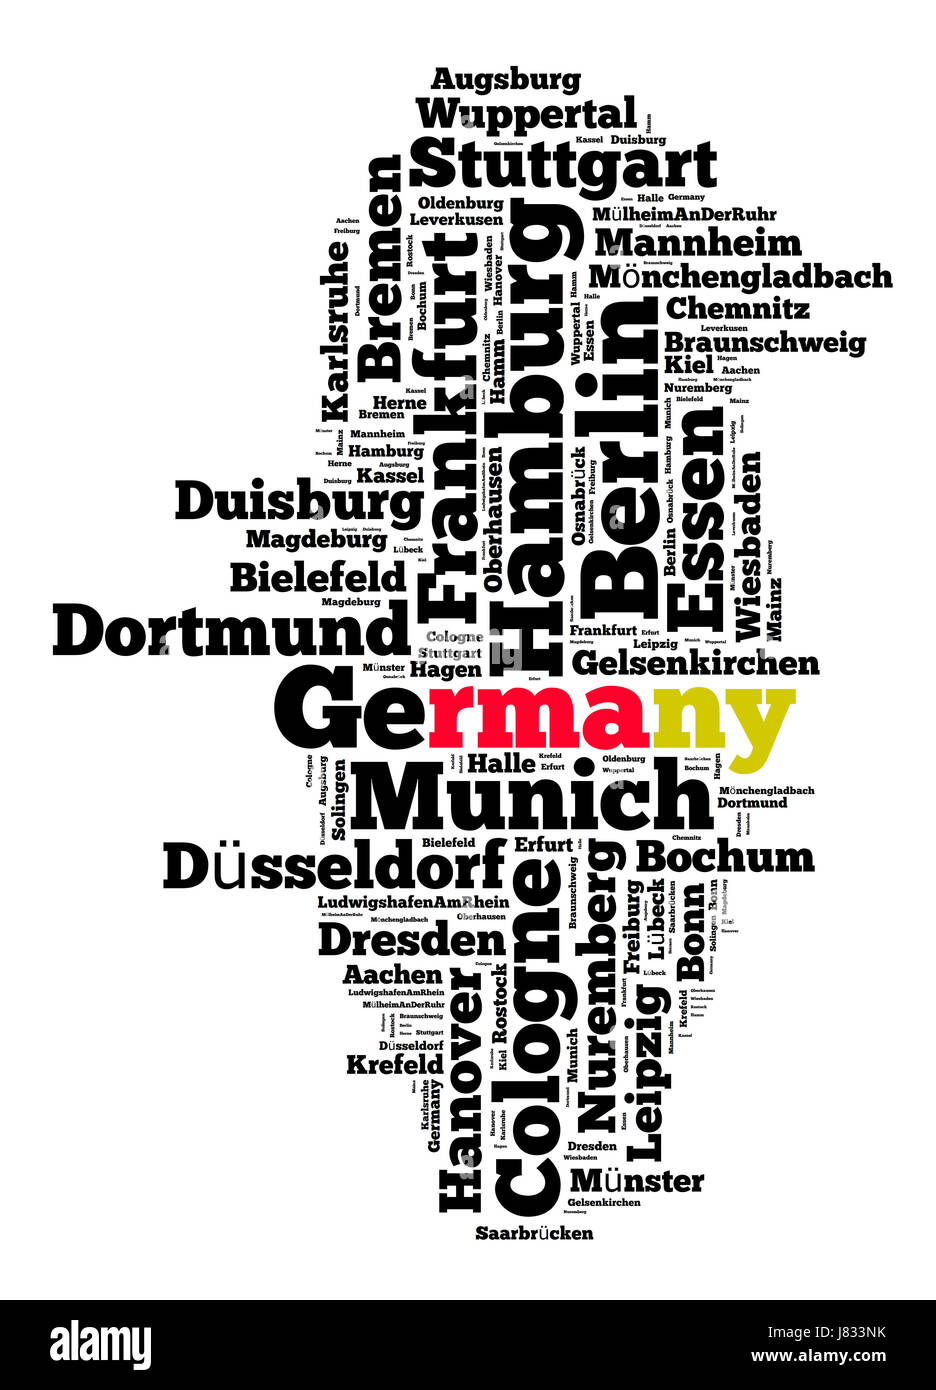 Localities in Germany word cloud concept Stock Photo